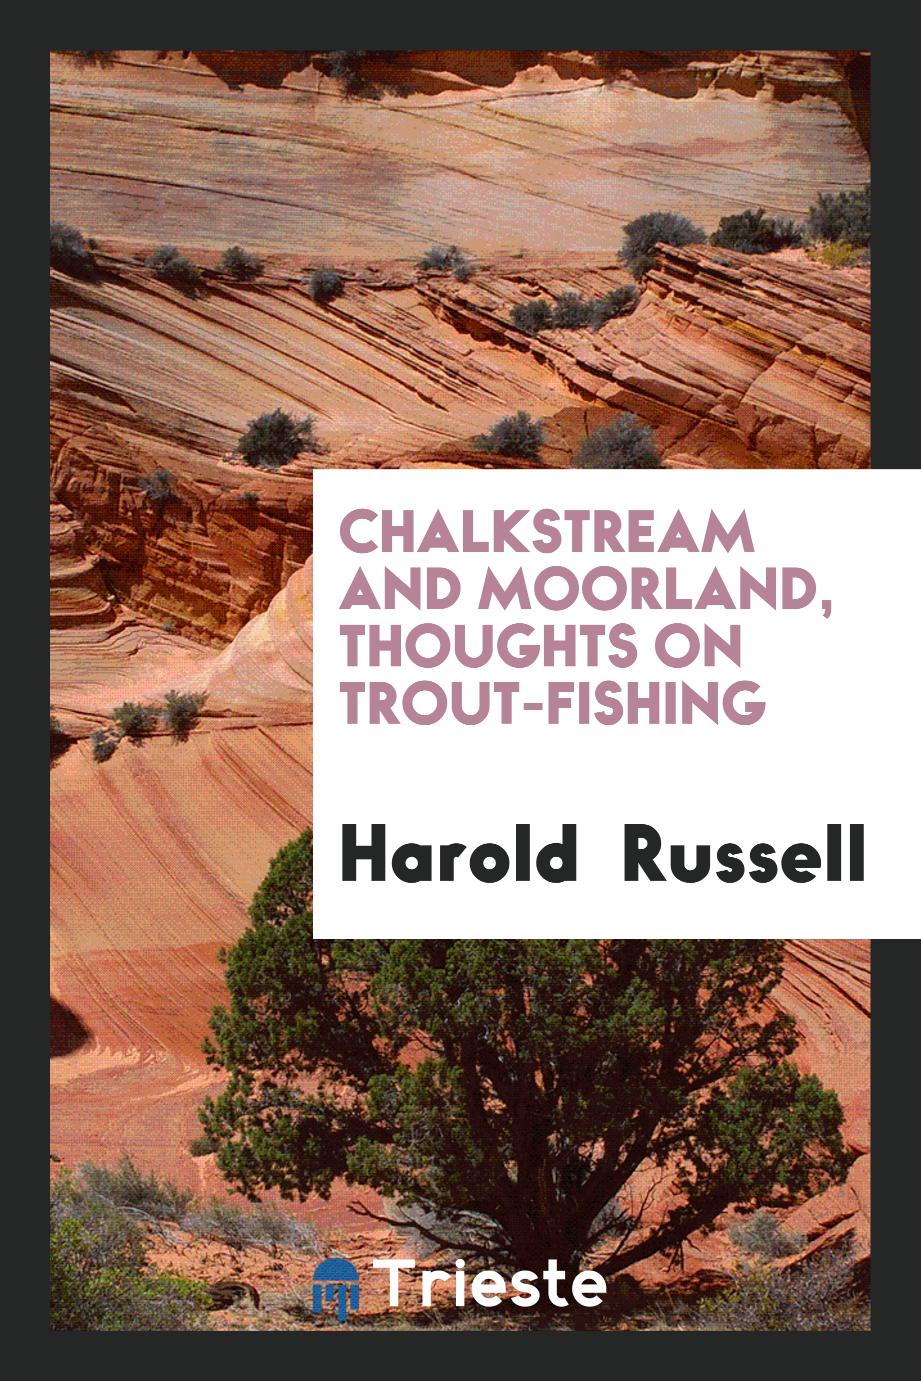 Chalkstream and moorland, thoughts on trout-fishing